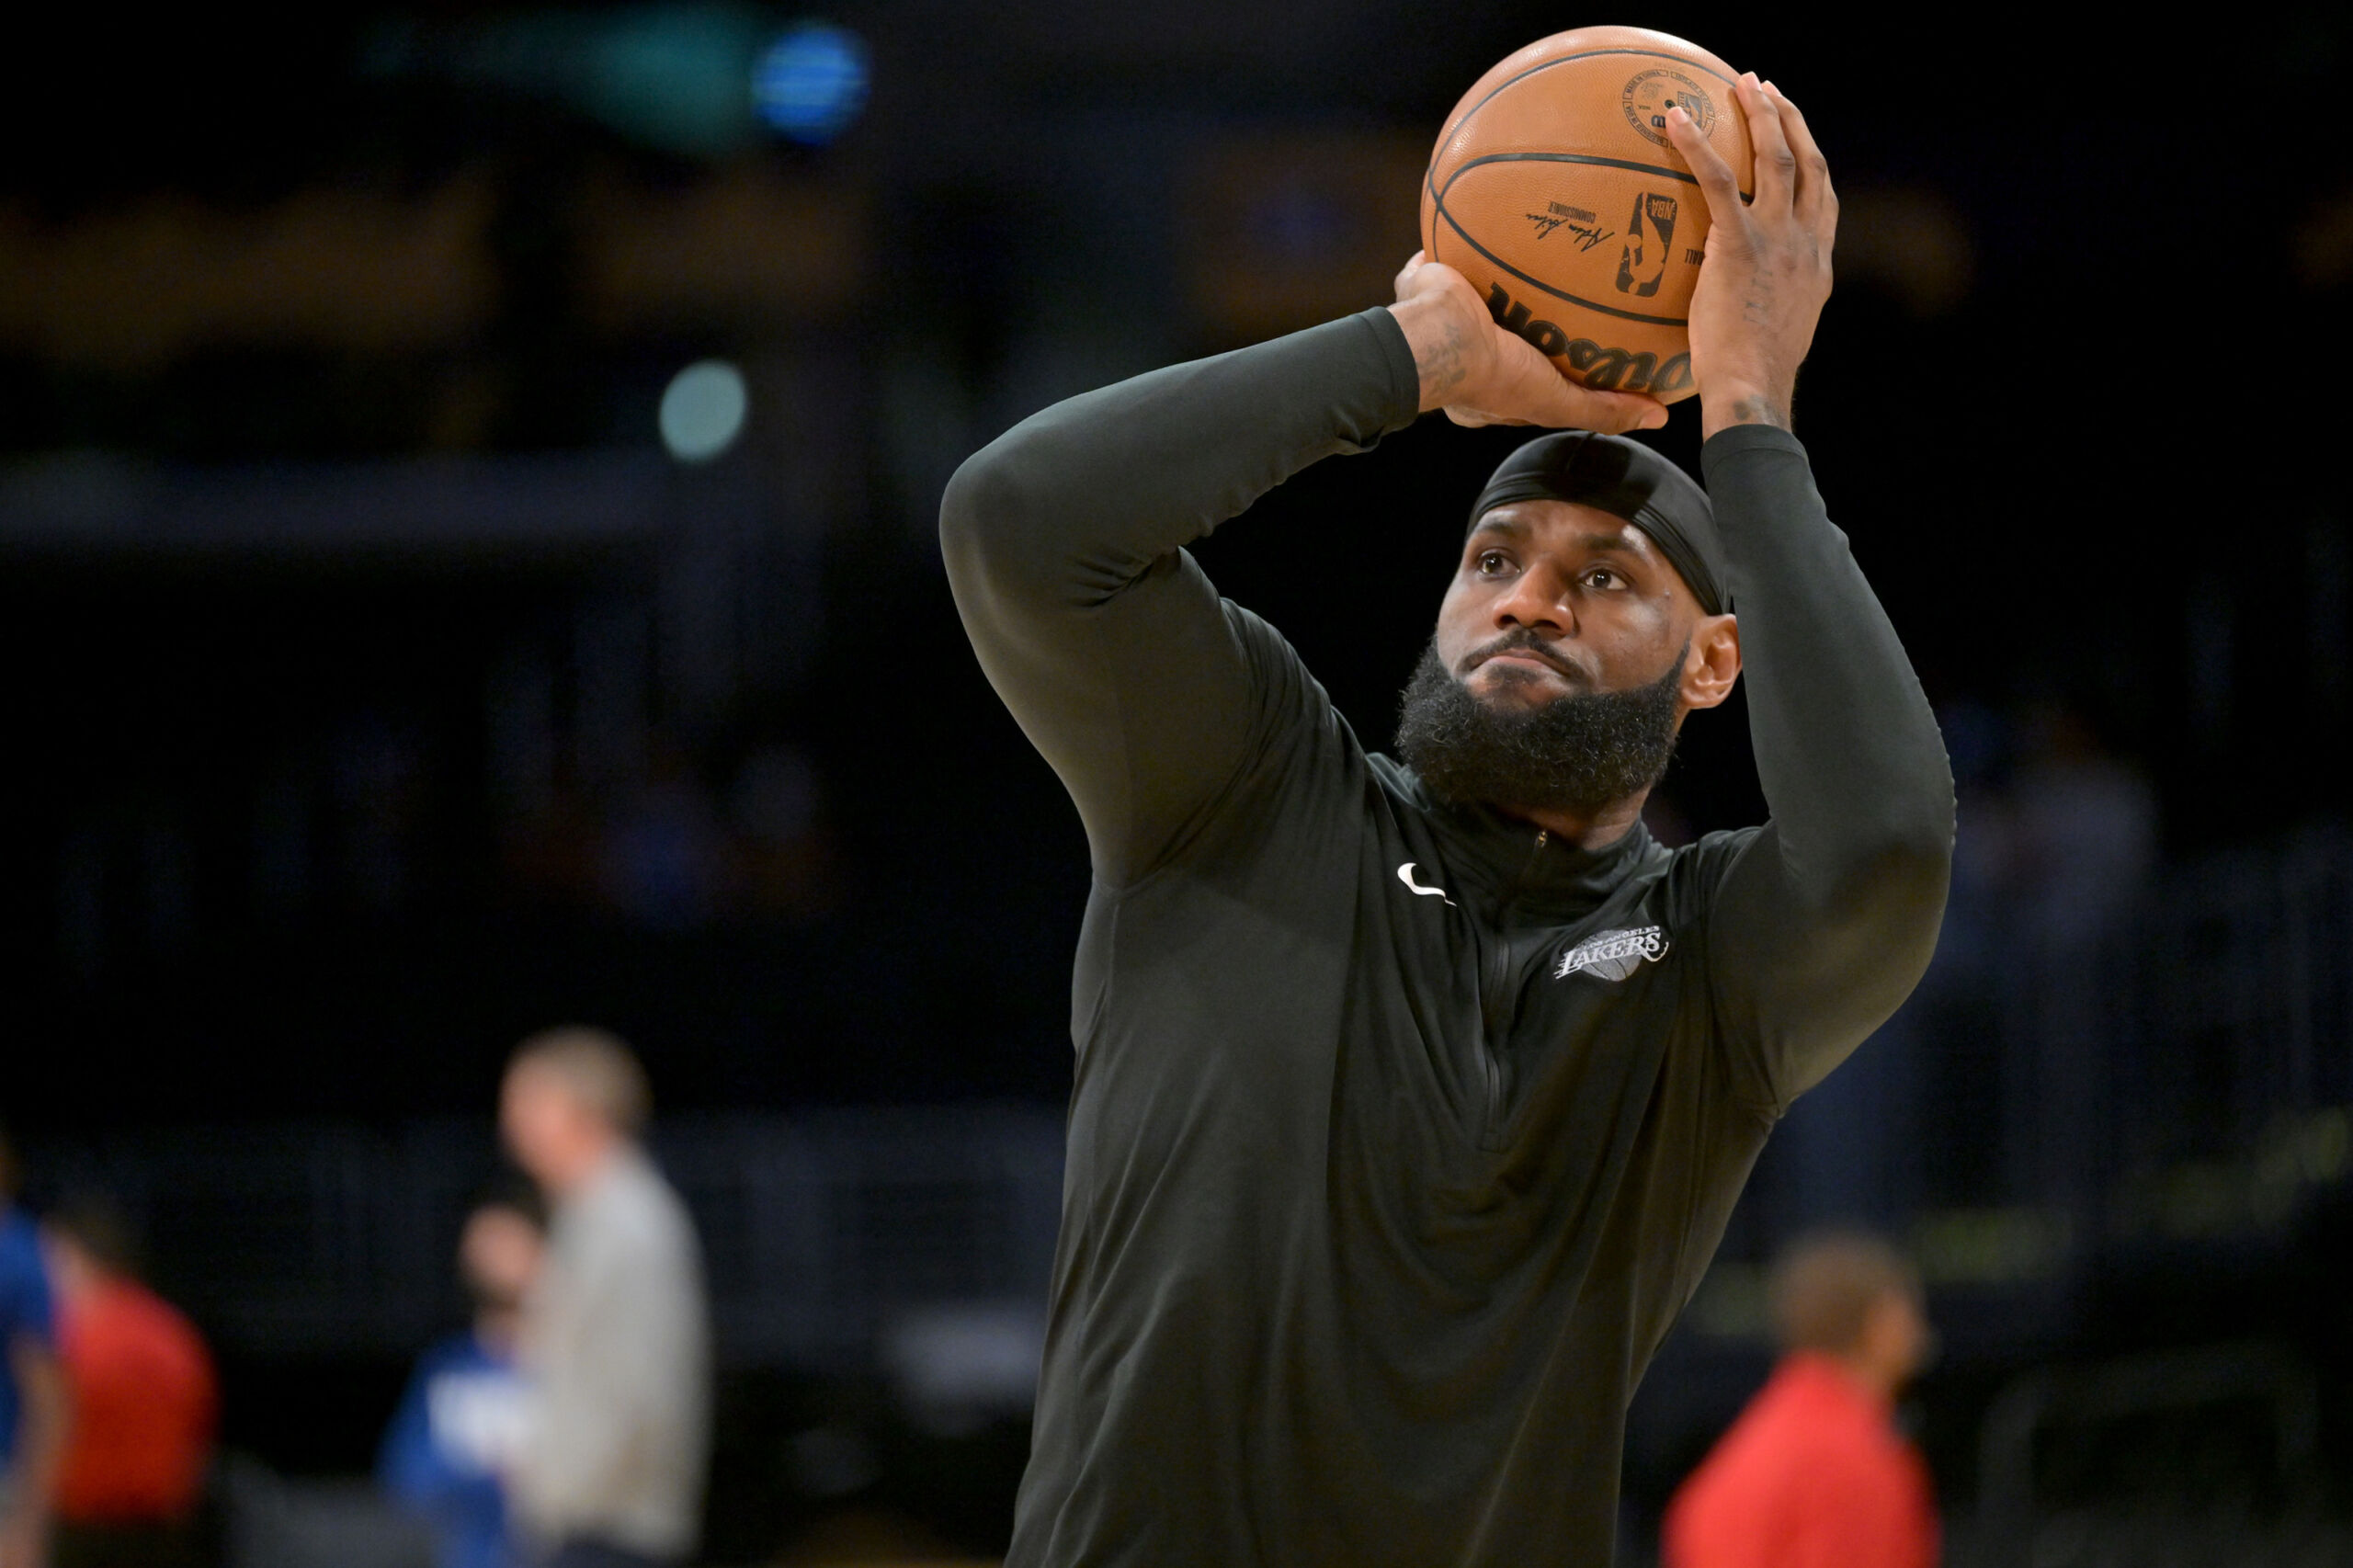 Could LeBron James end up playing for the Knicks? 